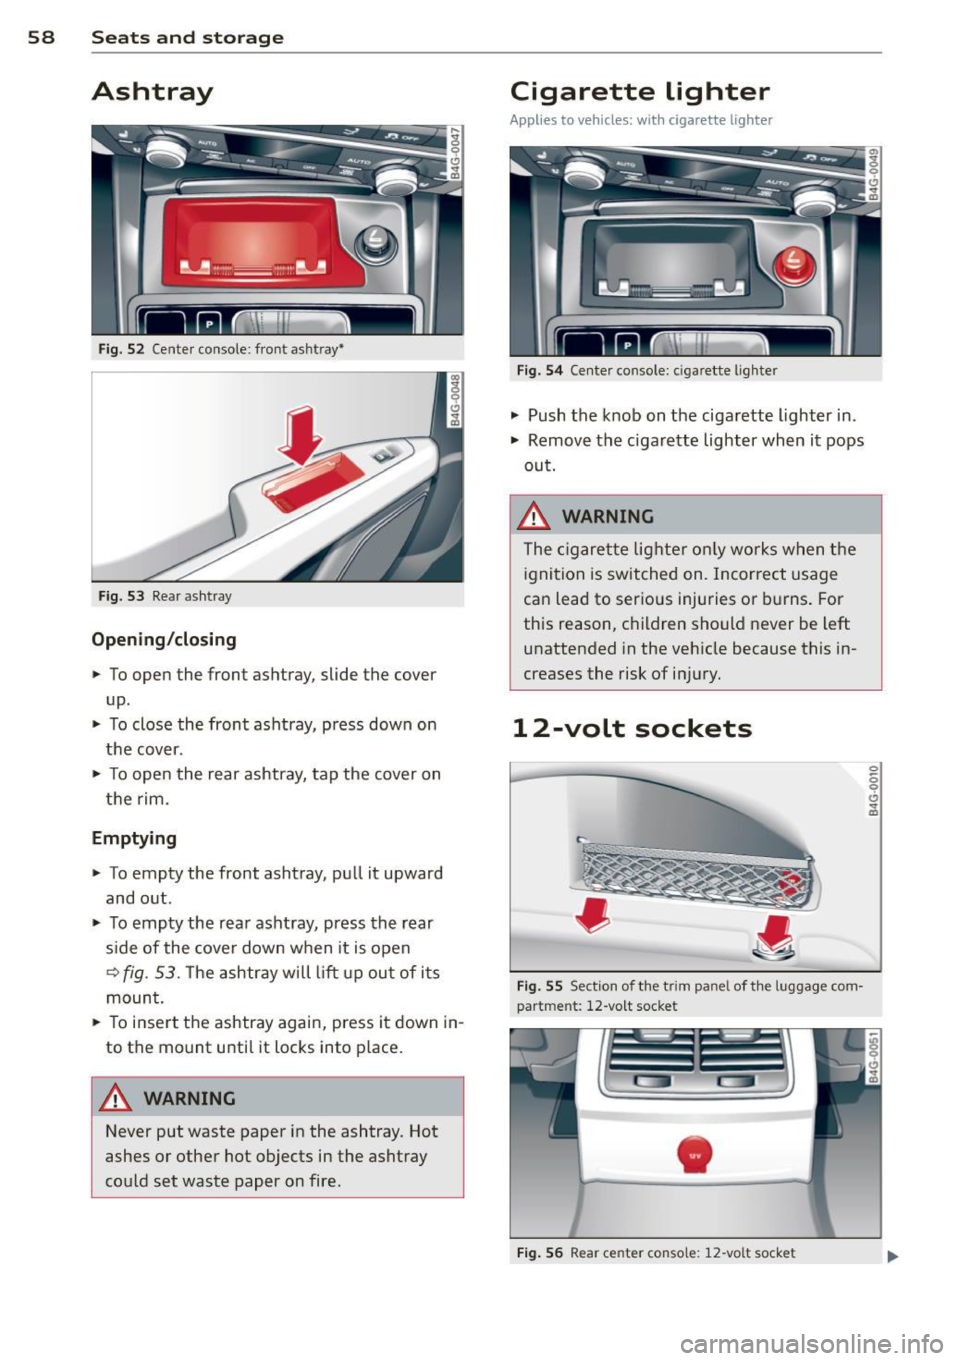 AUDI A7 2013  Owners Manual 58  Seats and  storage 
Ashtray 
Fig.  52 Center  console: front  ashtray~ 
Fig. 5 3 Rear  ashtray 
Opening /clo sing 
..  To  open  the front  ashtray,  slide  the  cover 
up  . 
..  To  close  the  